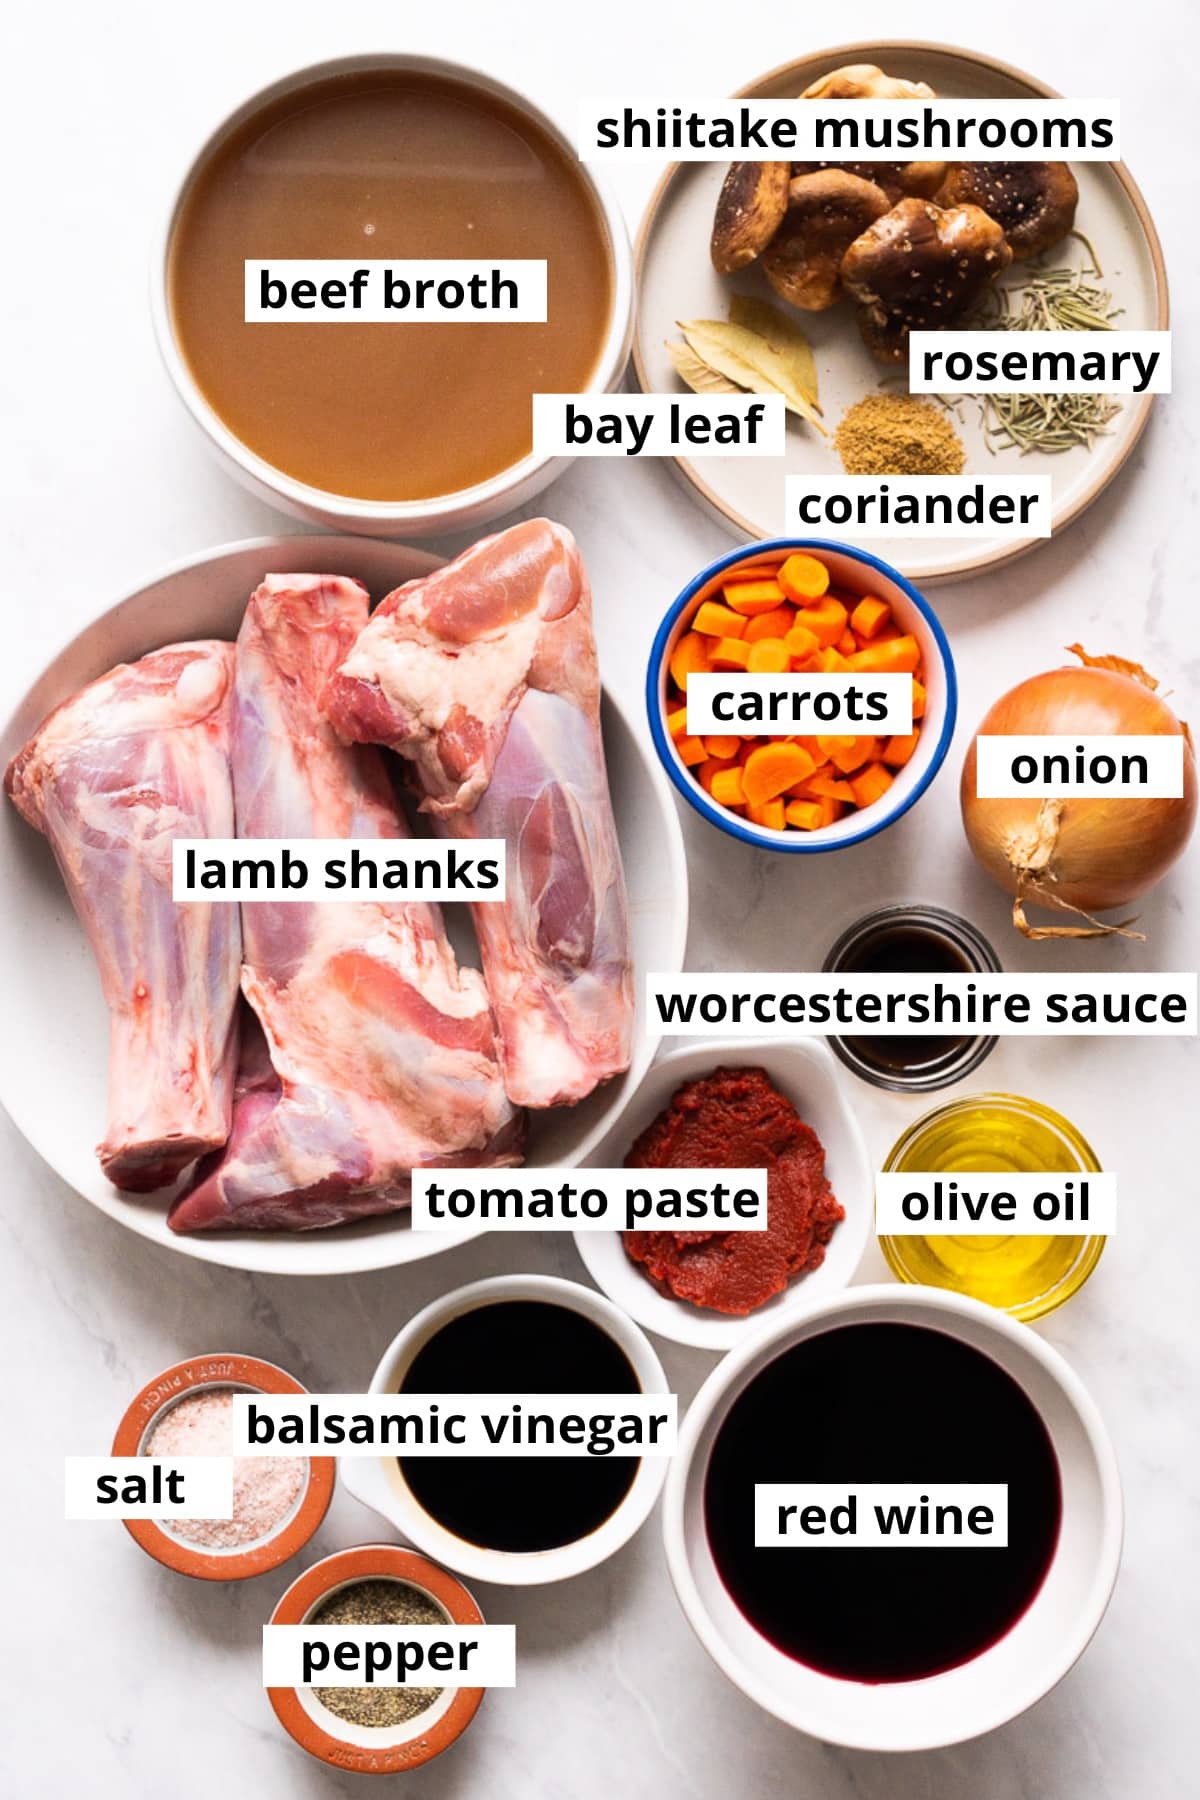 Lamb shanks, carrots, onion, shiitake mushrooms, beef broth, rosemary, they leave, coriander, worcestershire sauce, tomato paste, oil, balsamic vinegar, red wine, salt and pepper.